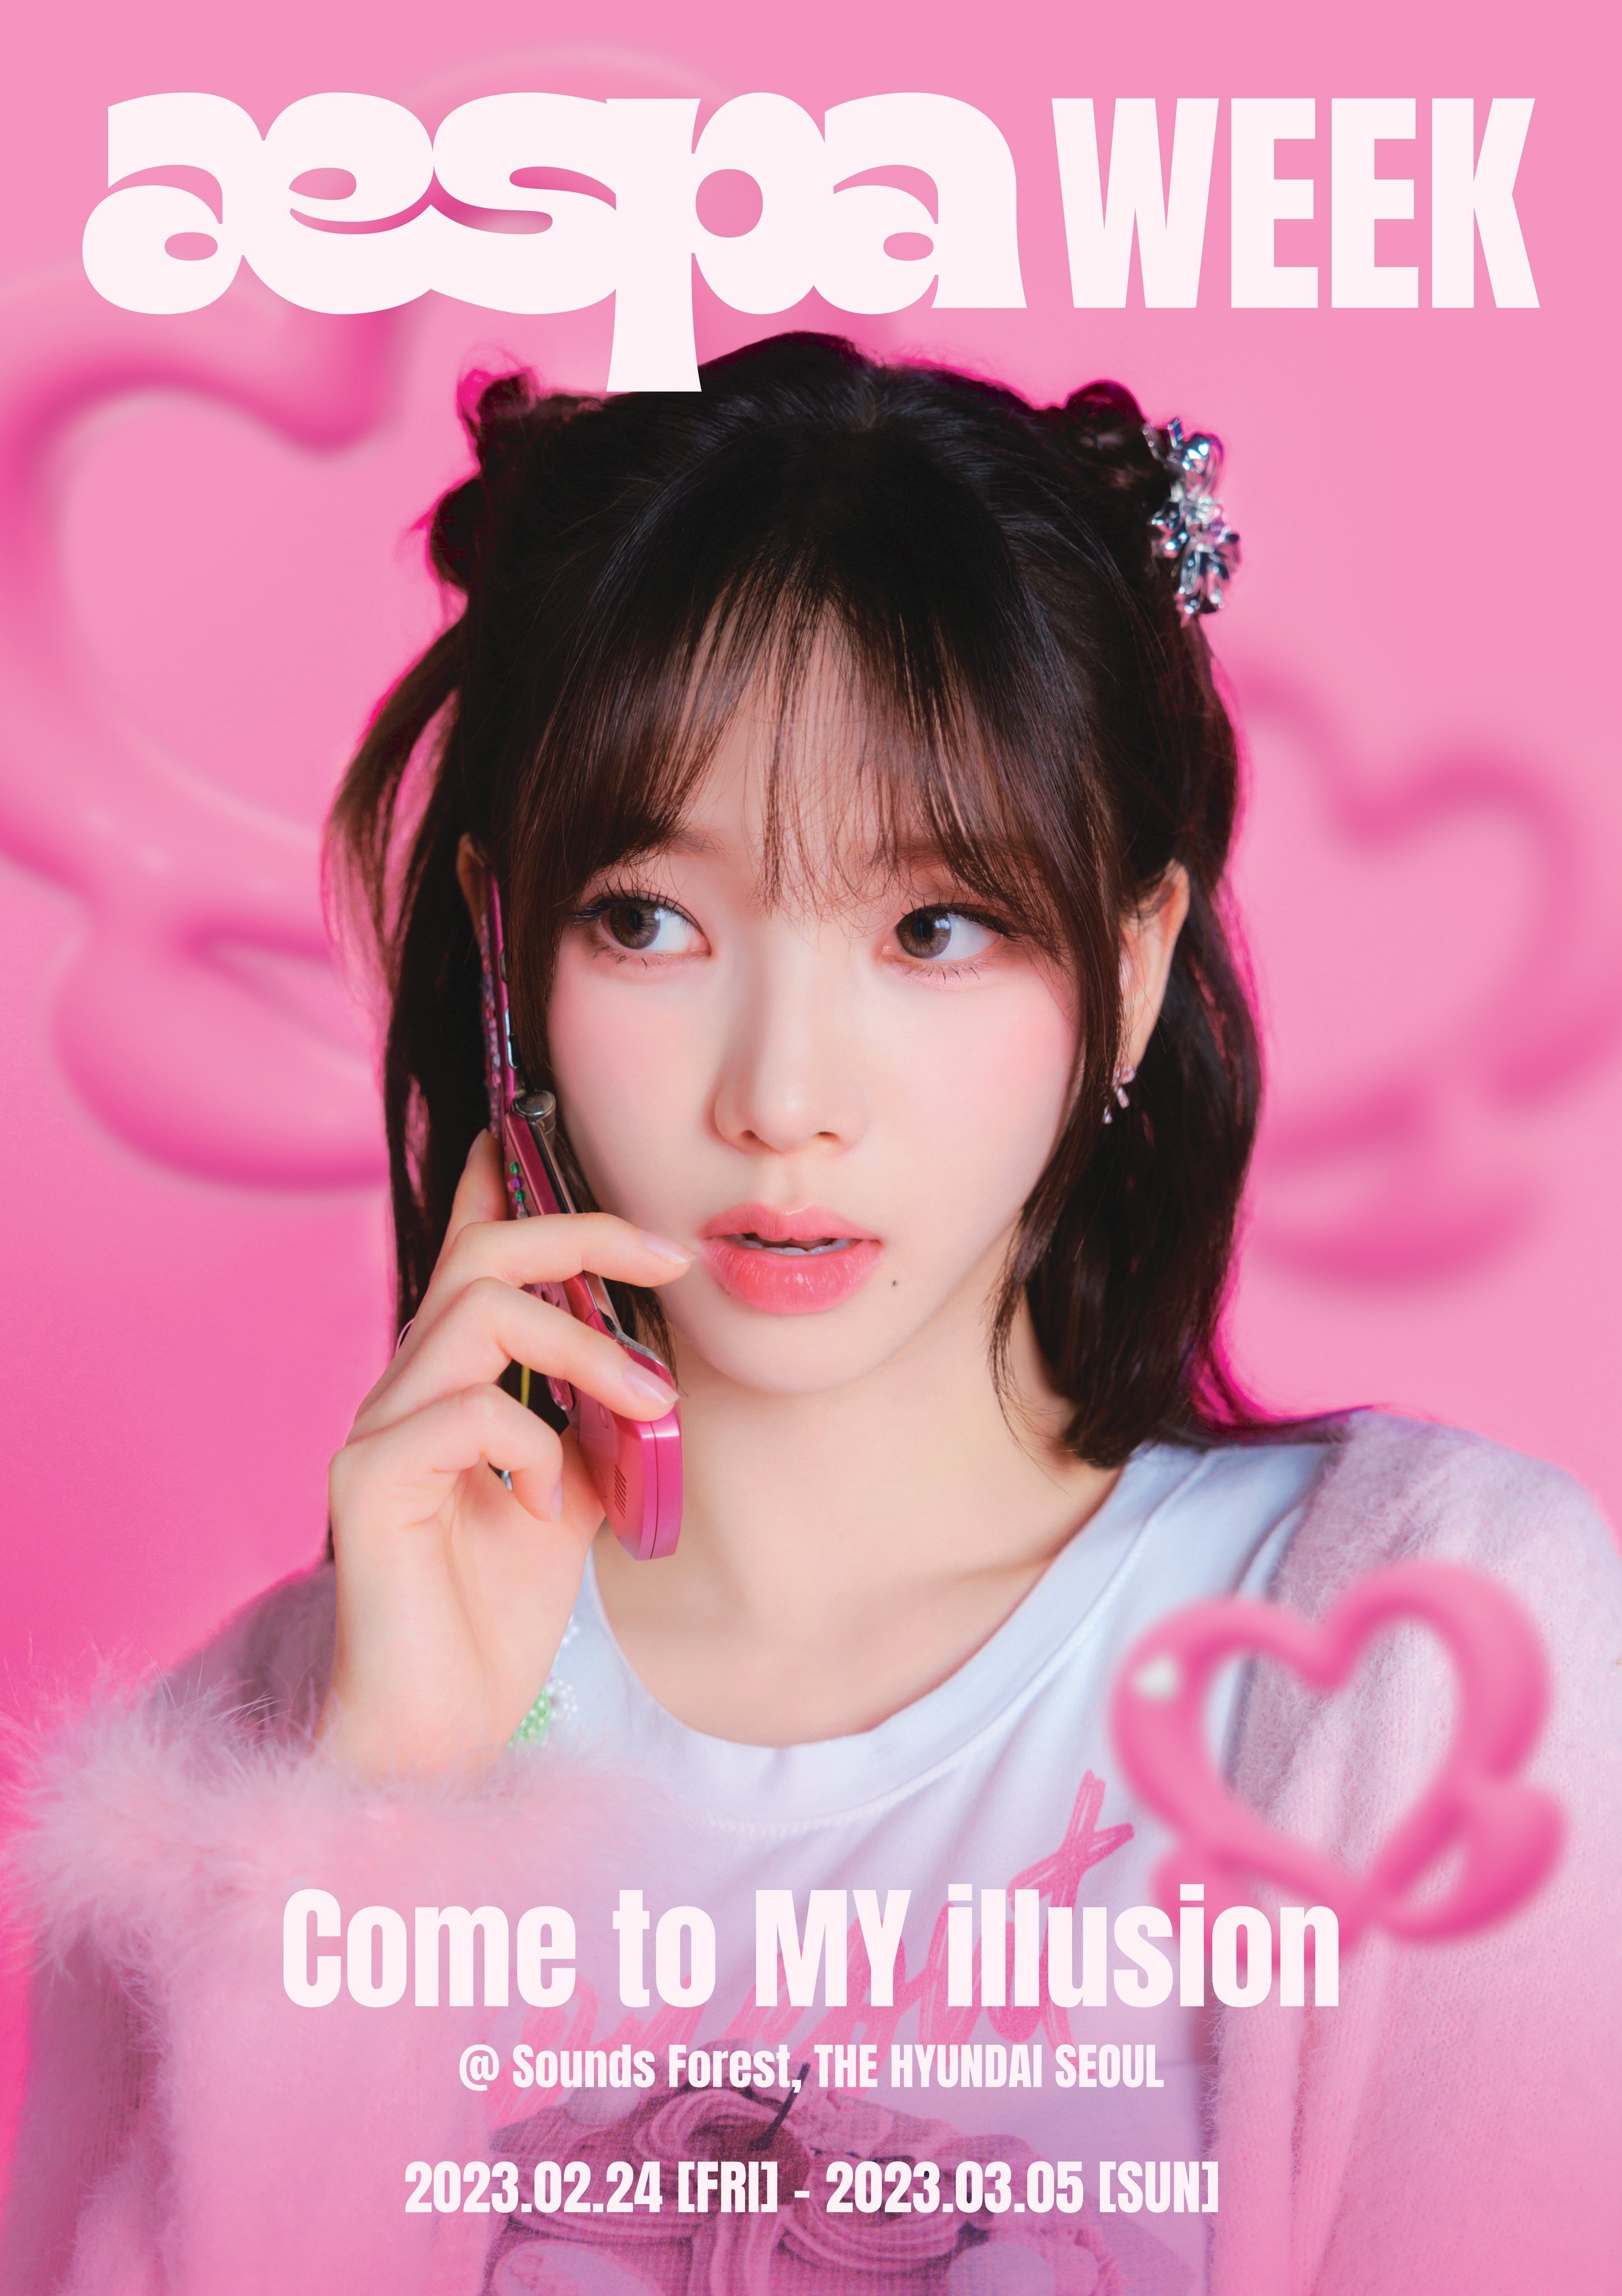 aespa - 'Come to MY illusion' Pop-up Store Concept Teasers | kpopping